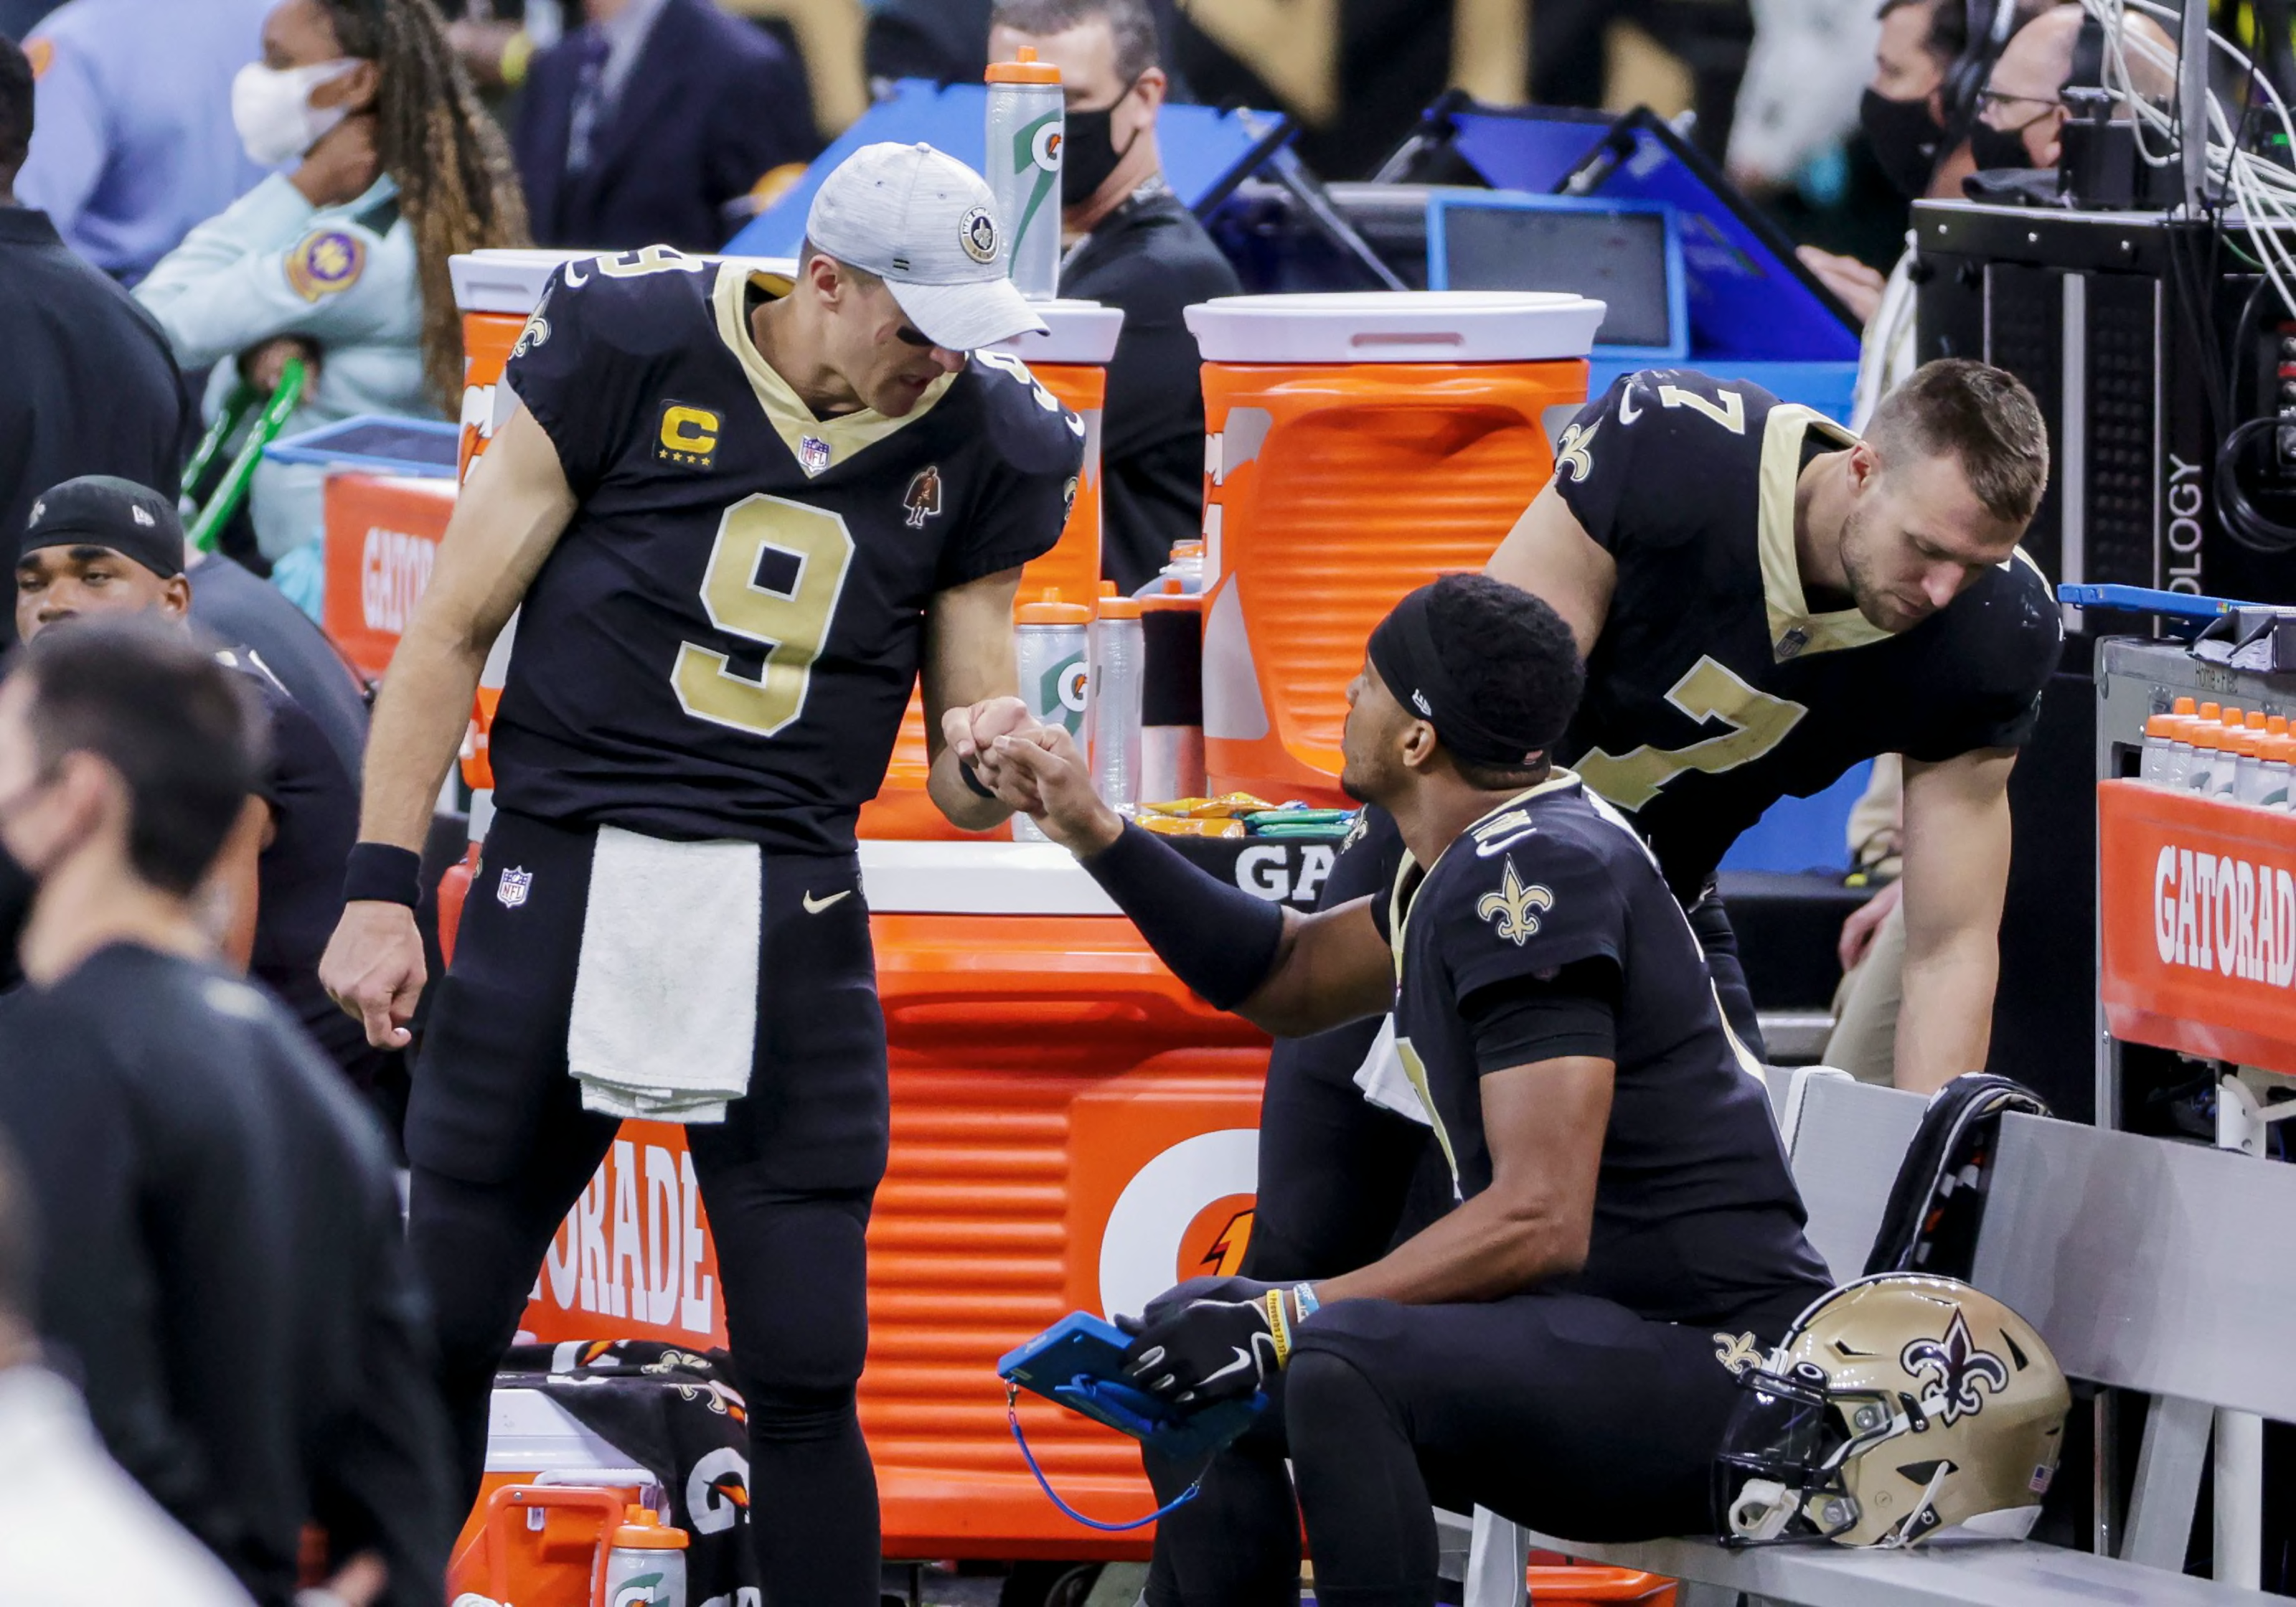 Recapping the New Orleans Saints season after three quarters Page 2